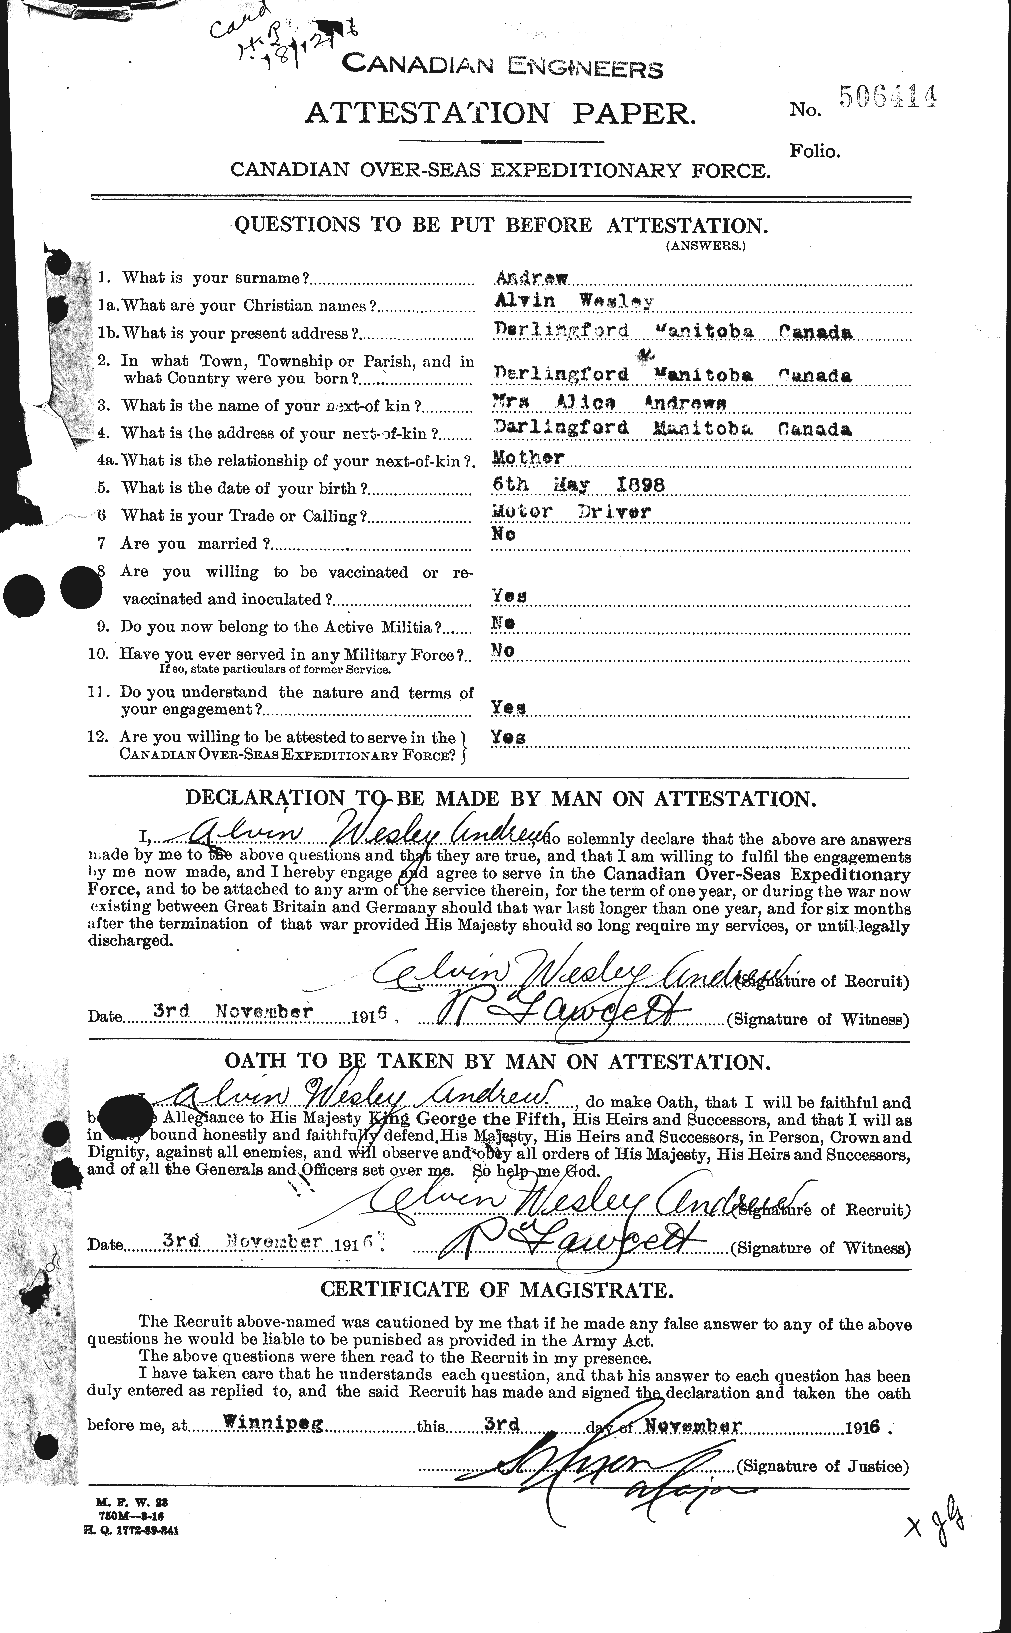 Personnel Records of the First World War - CEF 210567a